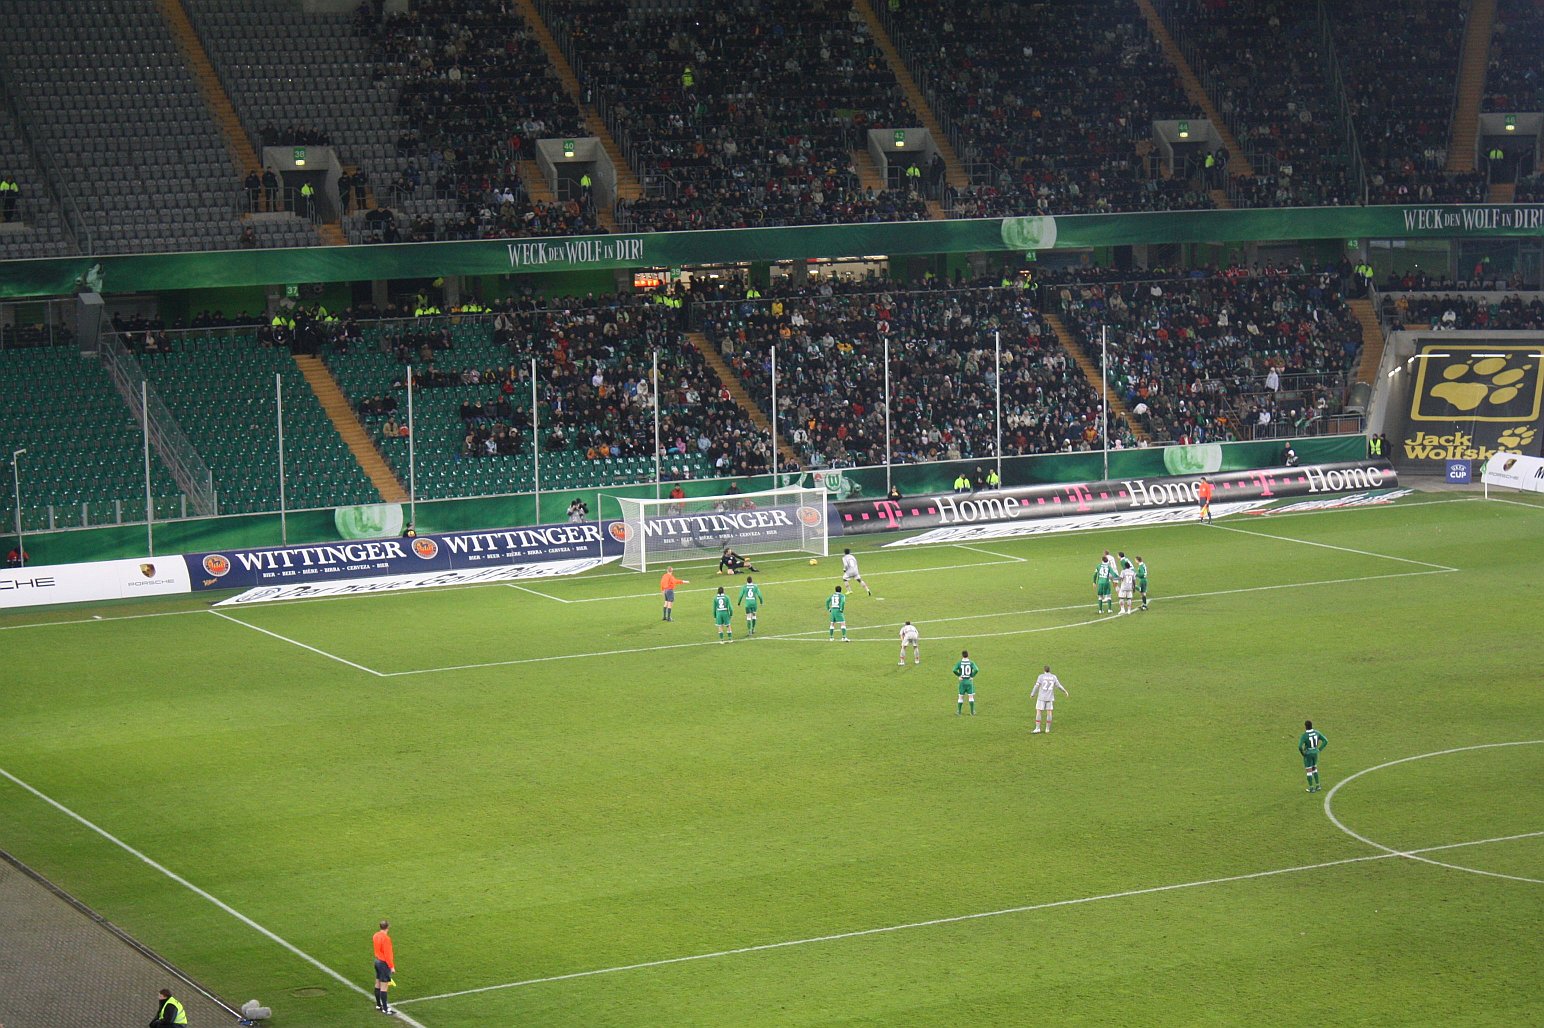 a group of people are playing soccer in a stadium